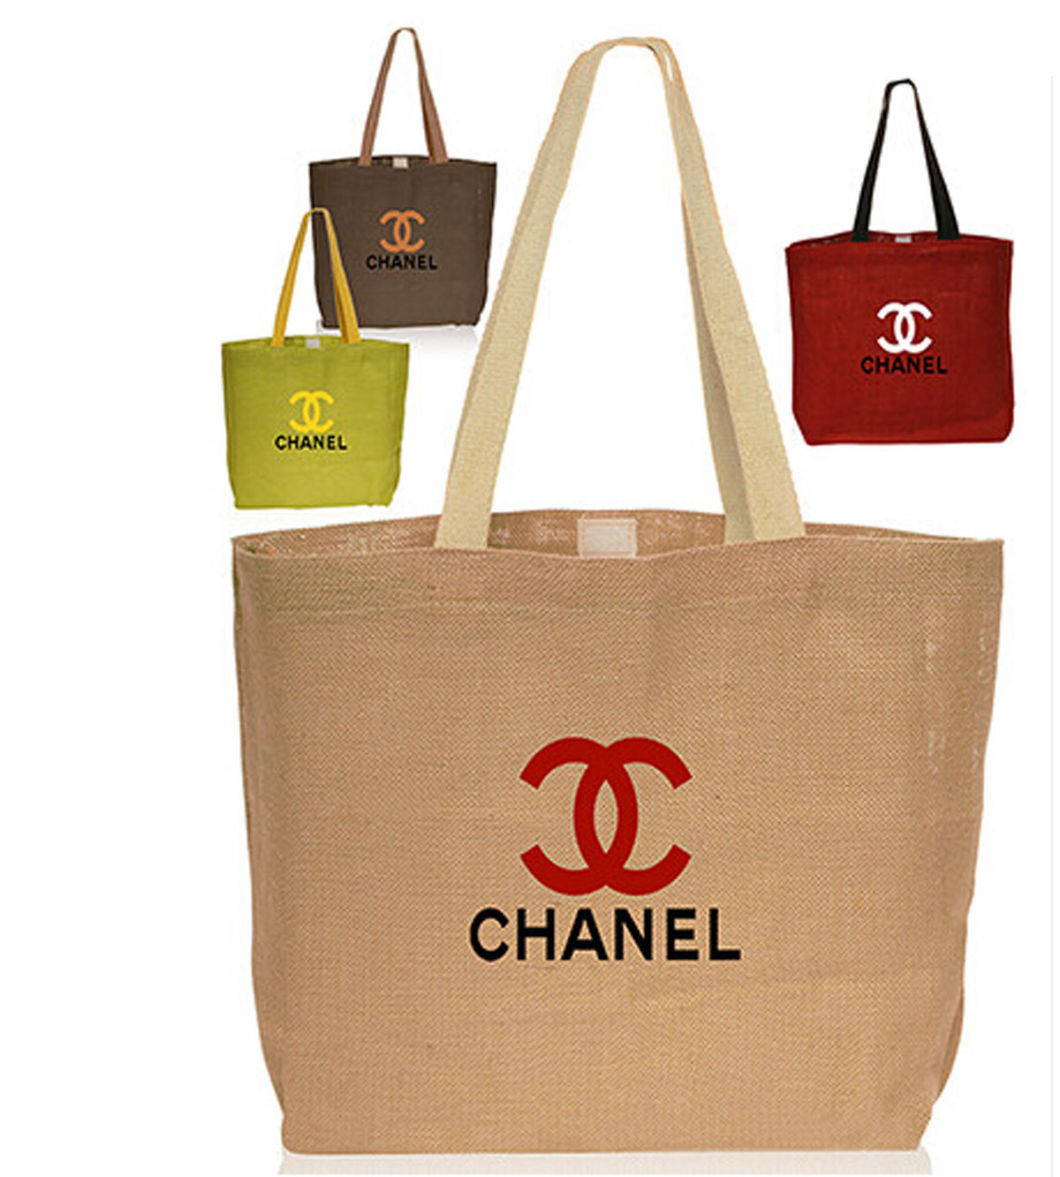 Promotional Jute Bag, for Shopping and Advertising